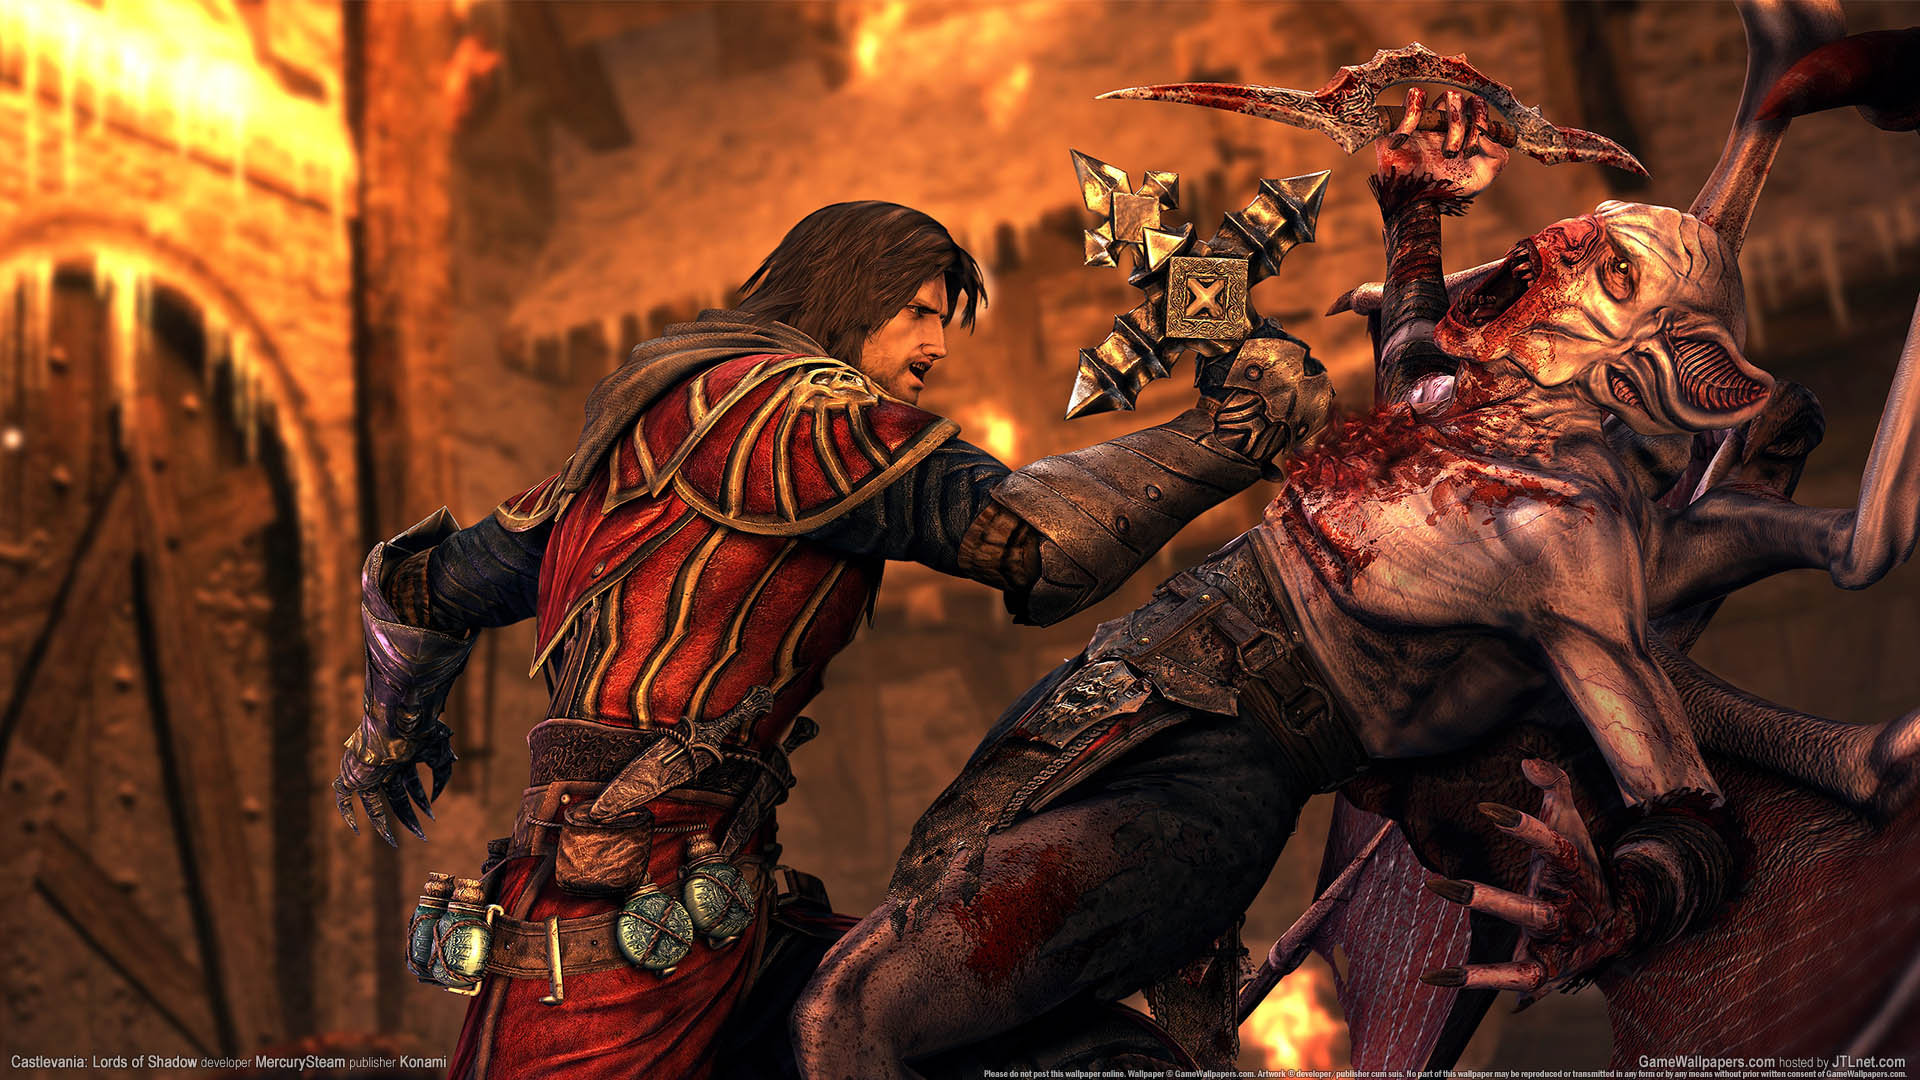 Castlevania: Lords of Shadow achtergrond 04 1920x1080